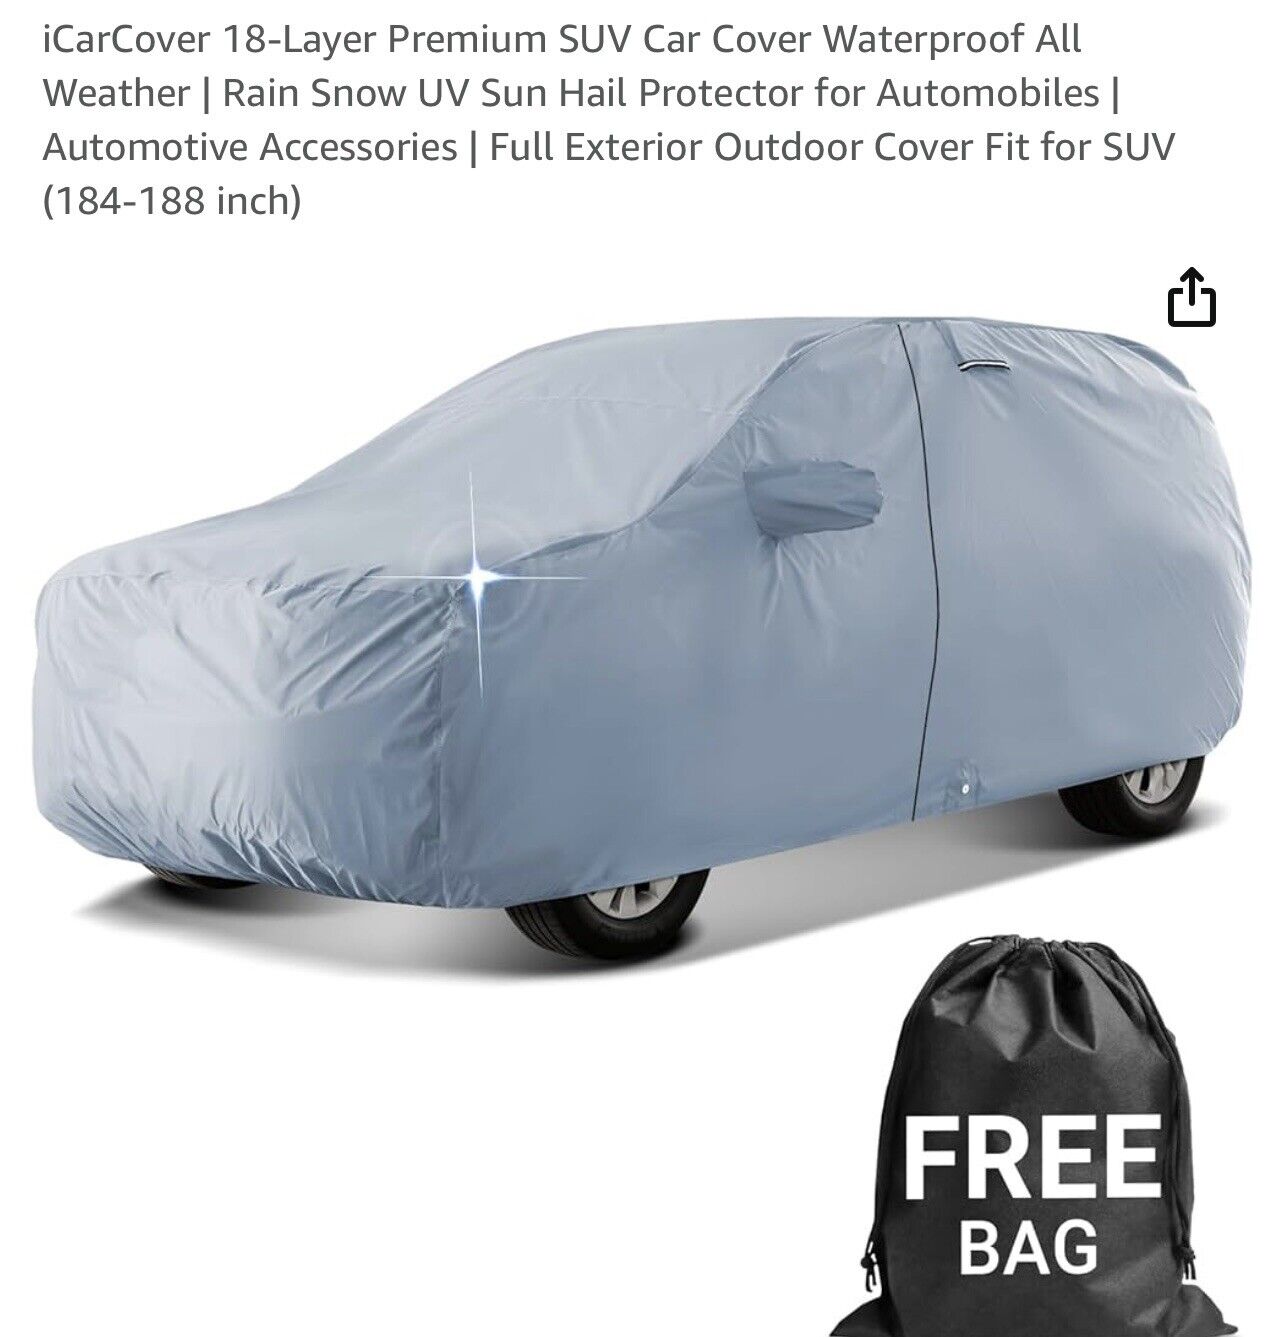 iCarCover 18-Layer Premium SUV Car Cover (184-188inch)